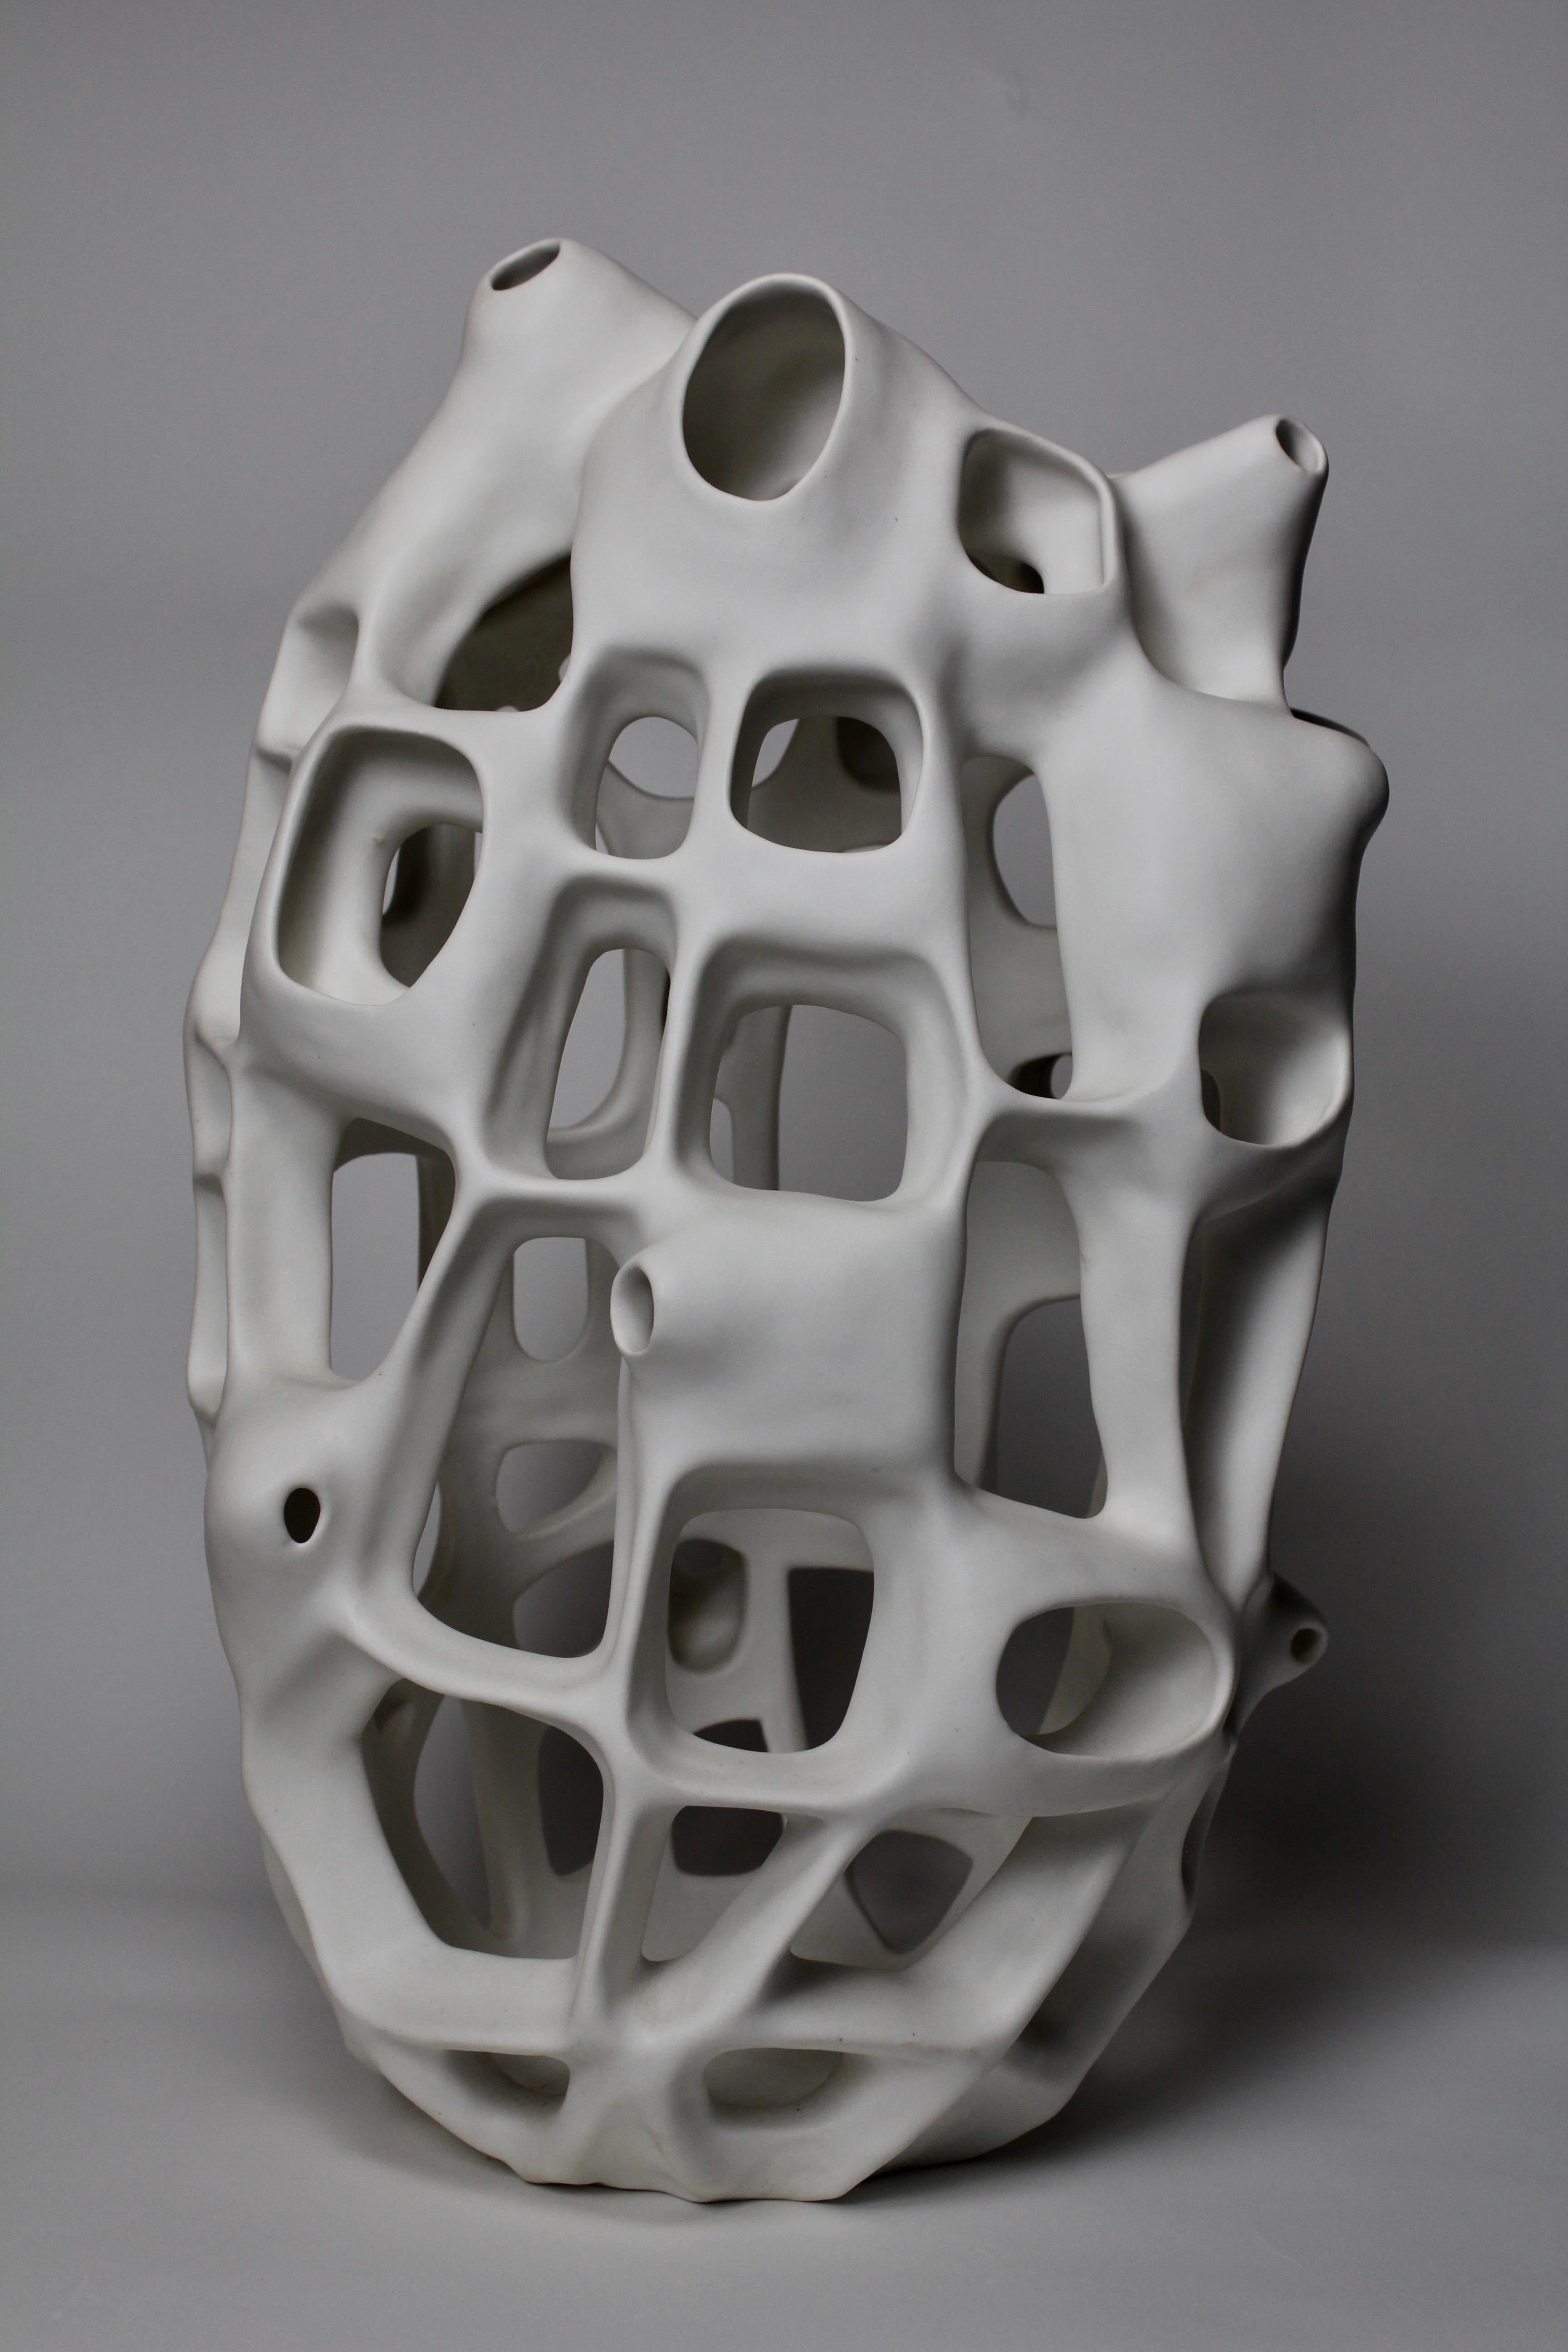 Joan Lurie Abstract Sculpture - Untitled #3751 - Porcelain geometric white sculpture 